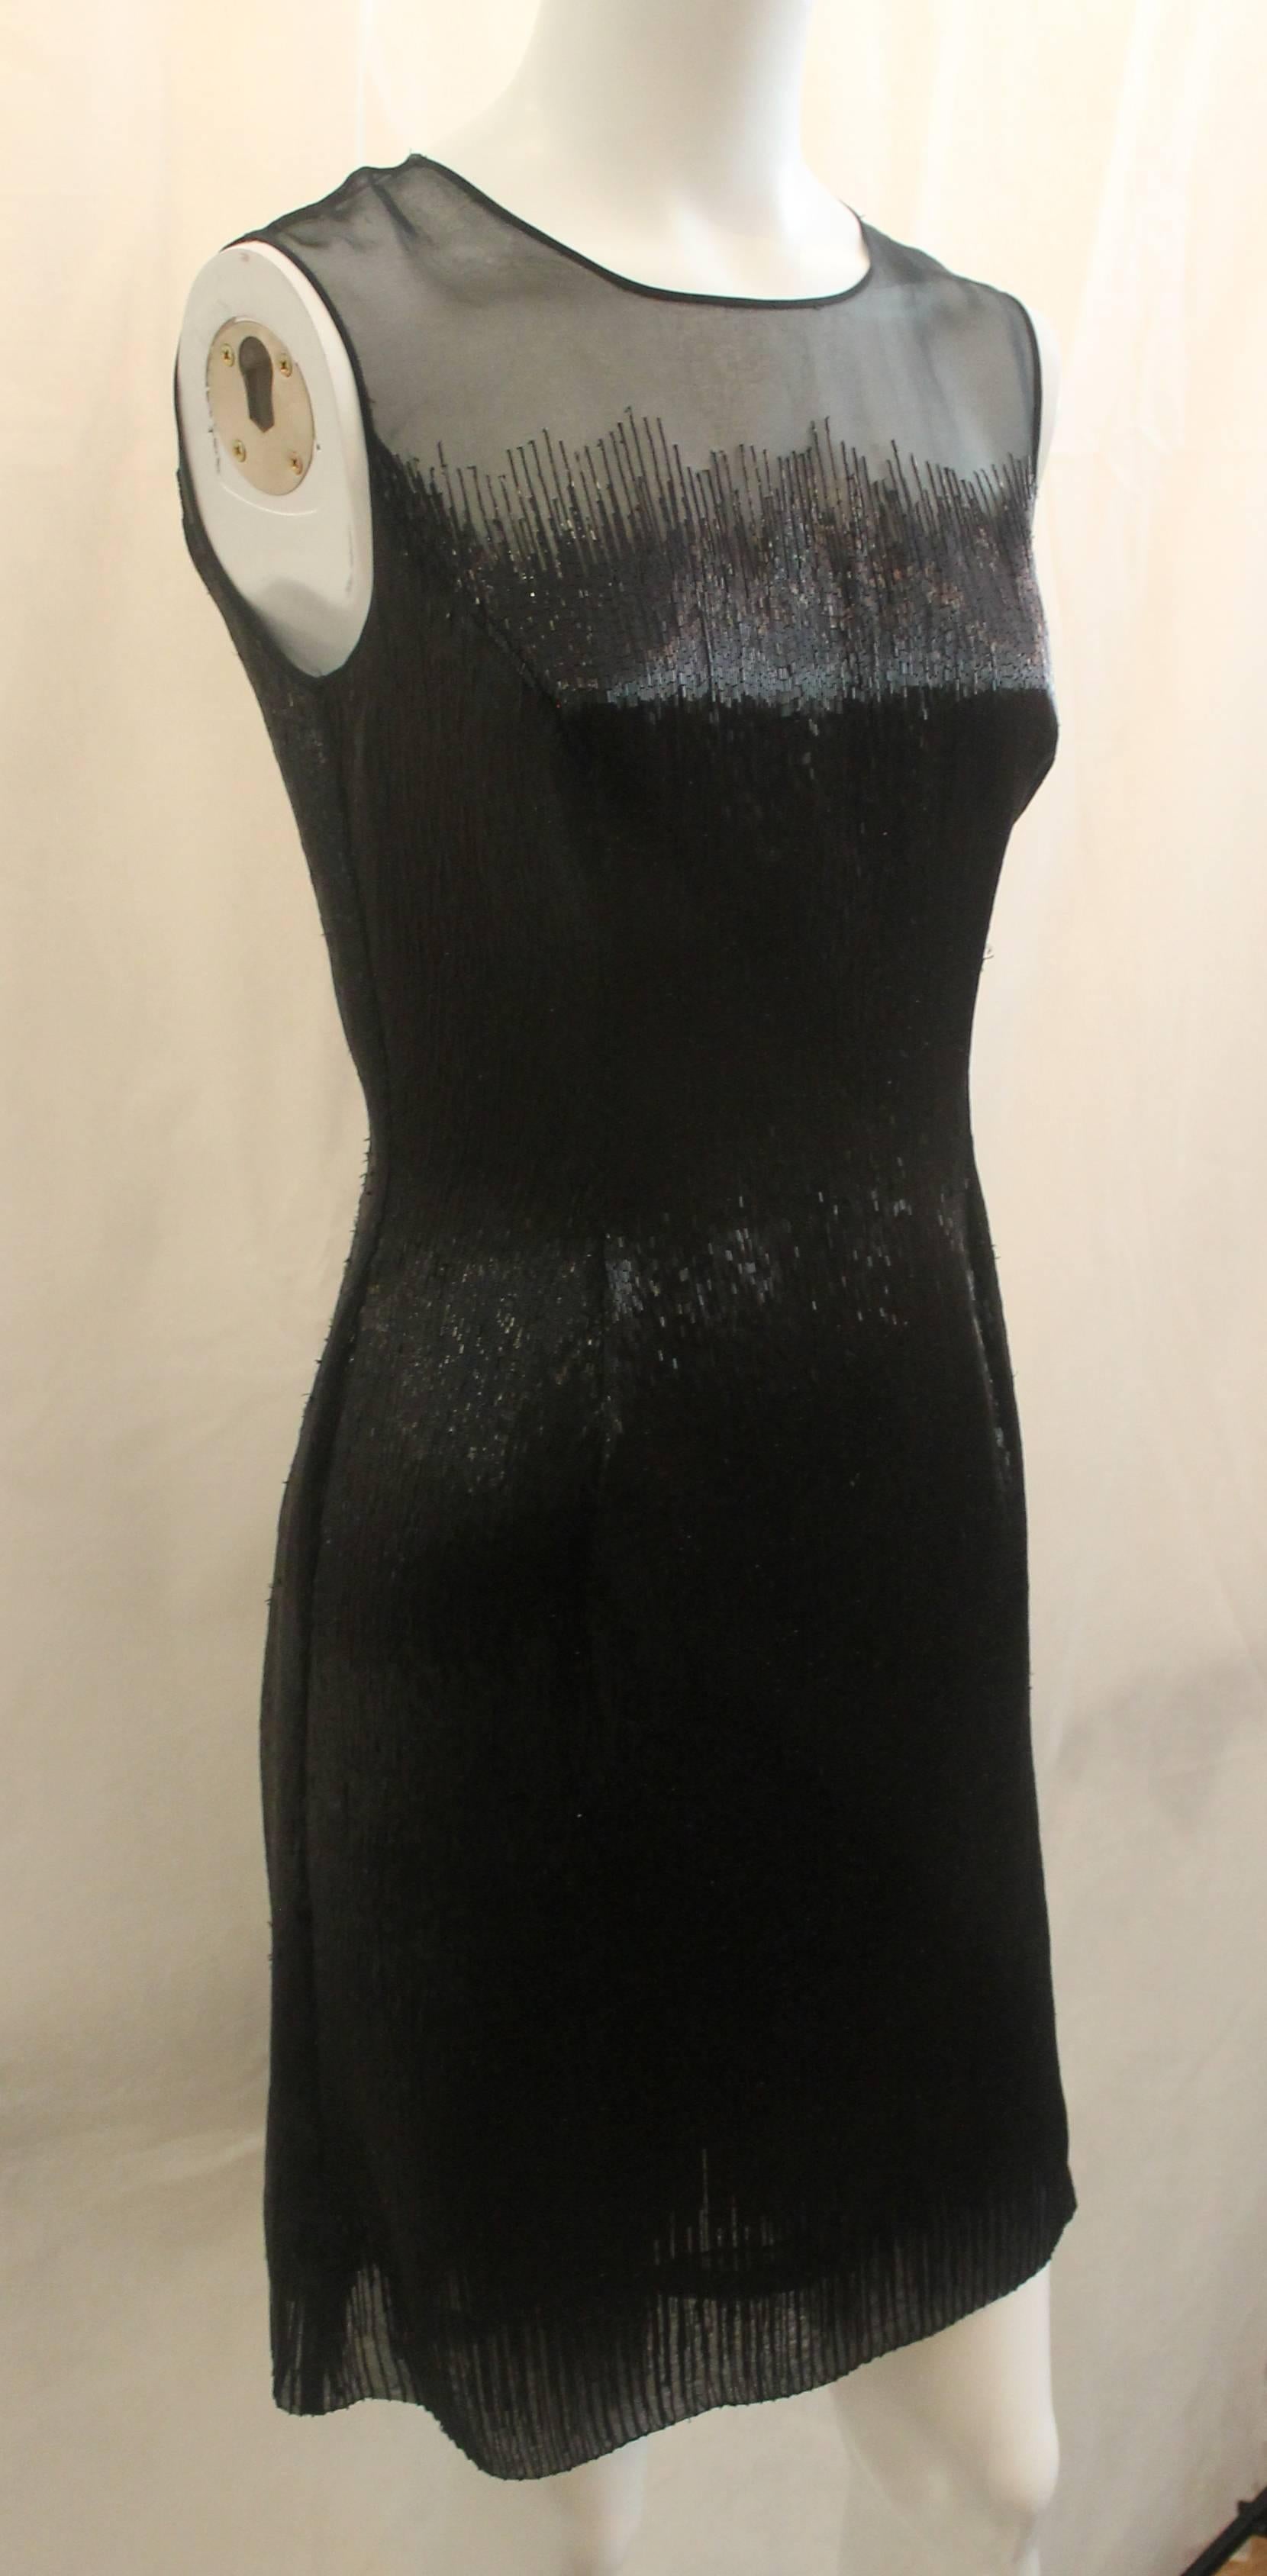 Oscar de la Renta Black Fully Beaded Sleeveless Dress - 2. This dress is an exquisite piece with a sheer top turning into beading. This dress features to non-beaded slits in the back and a form fitting look.

Measurements:
Bust- 32.5